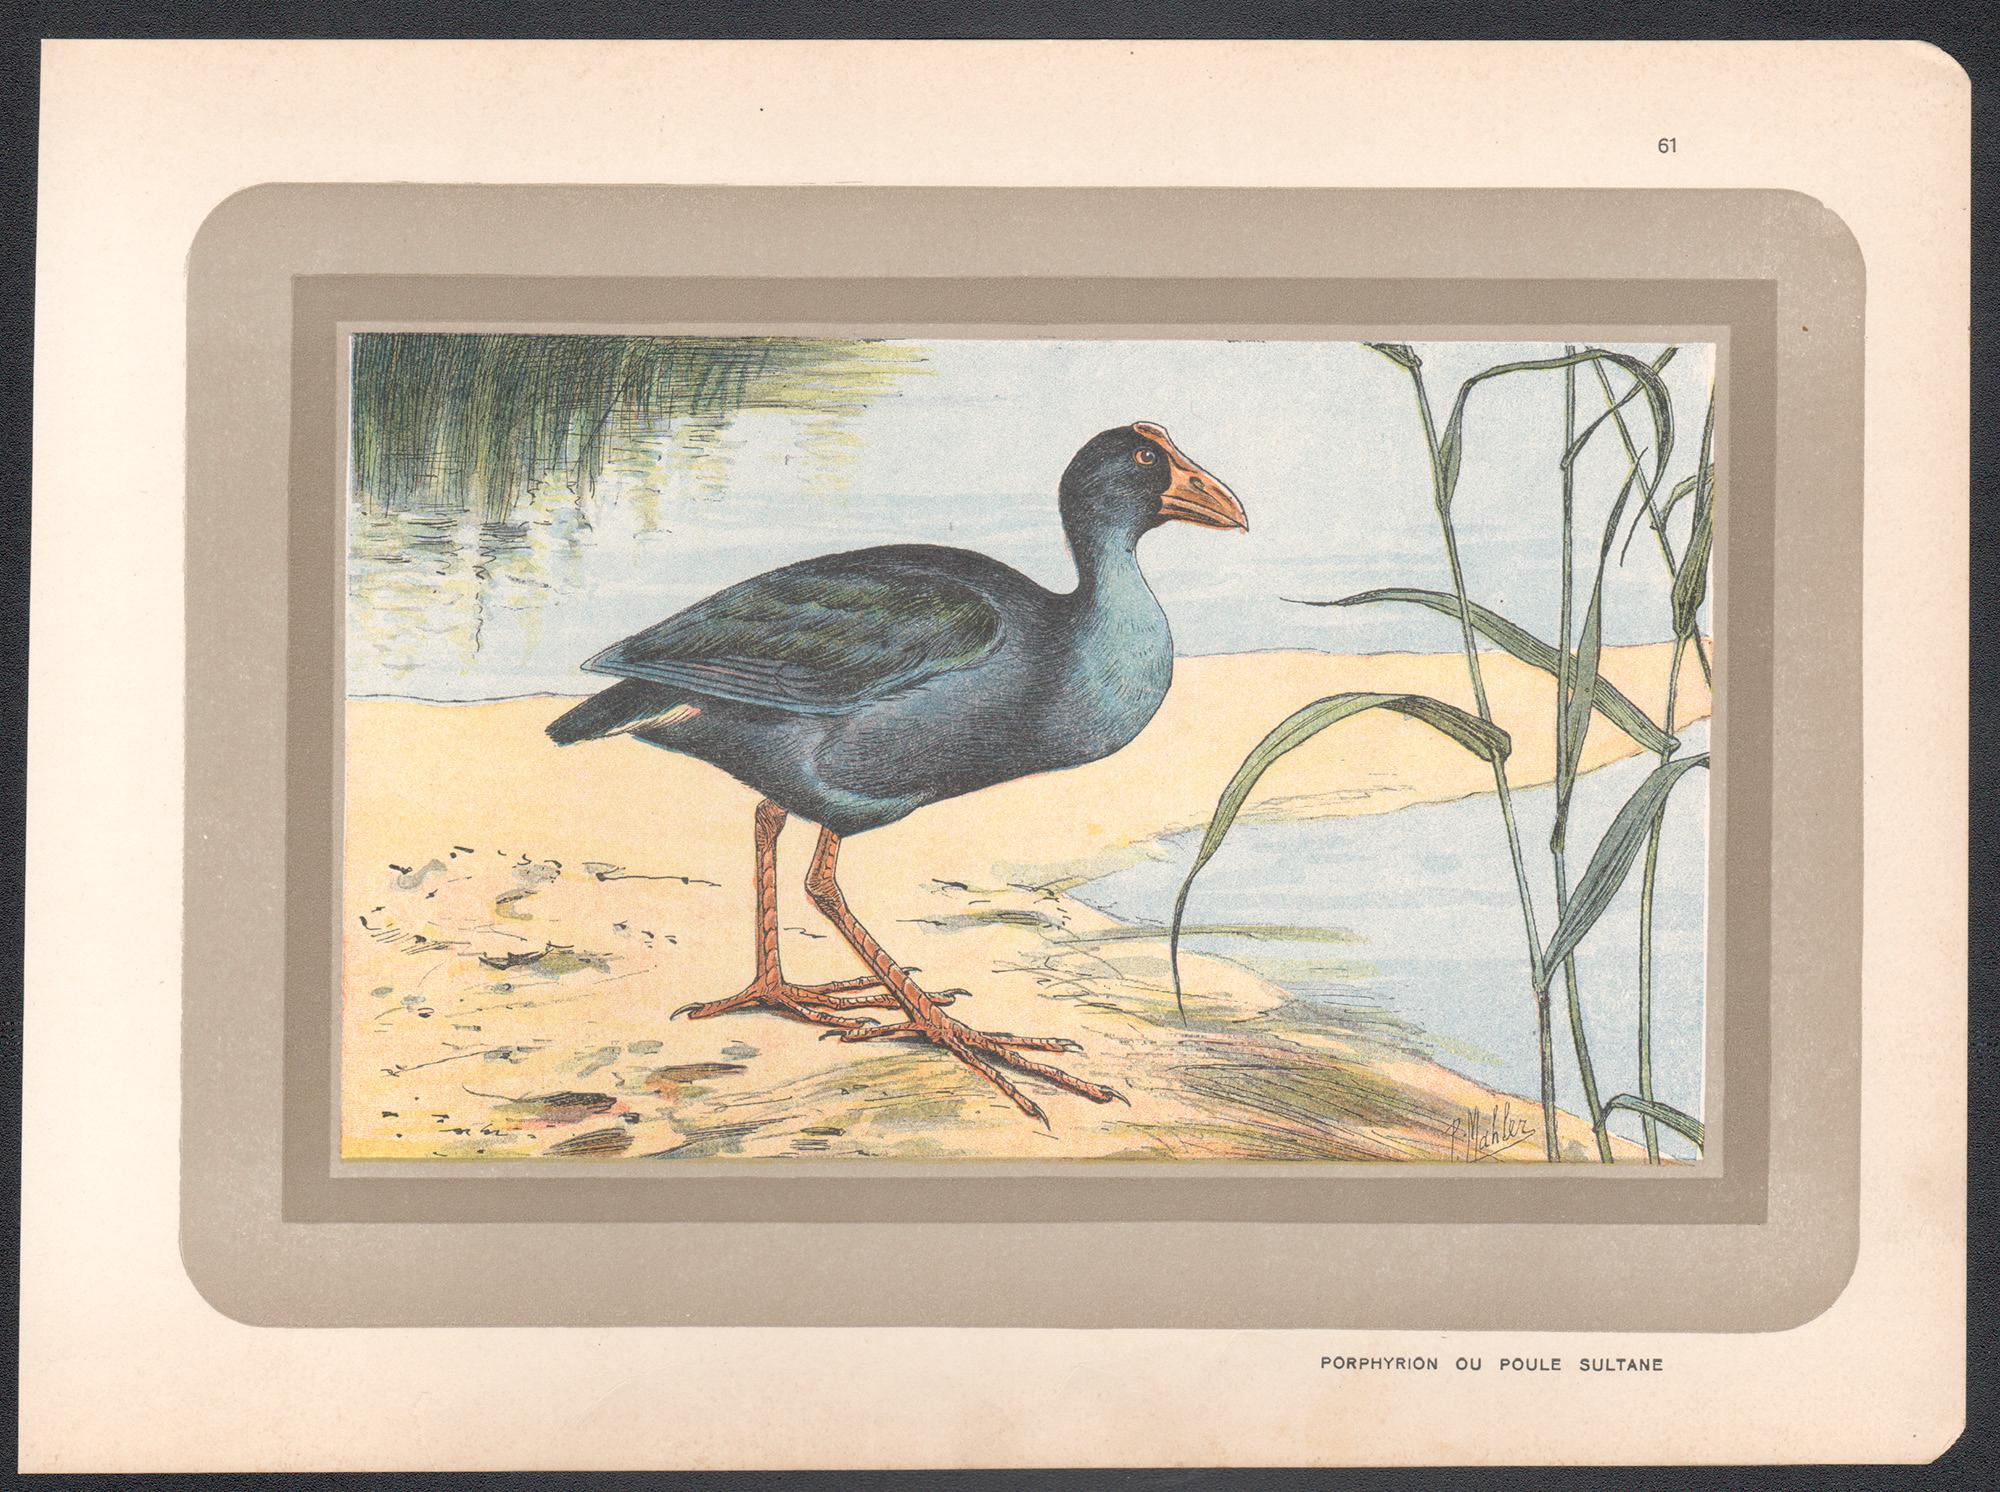 Western Swamphen, French antique natural history water bird art print - Print by Unknown